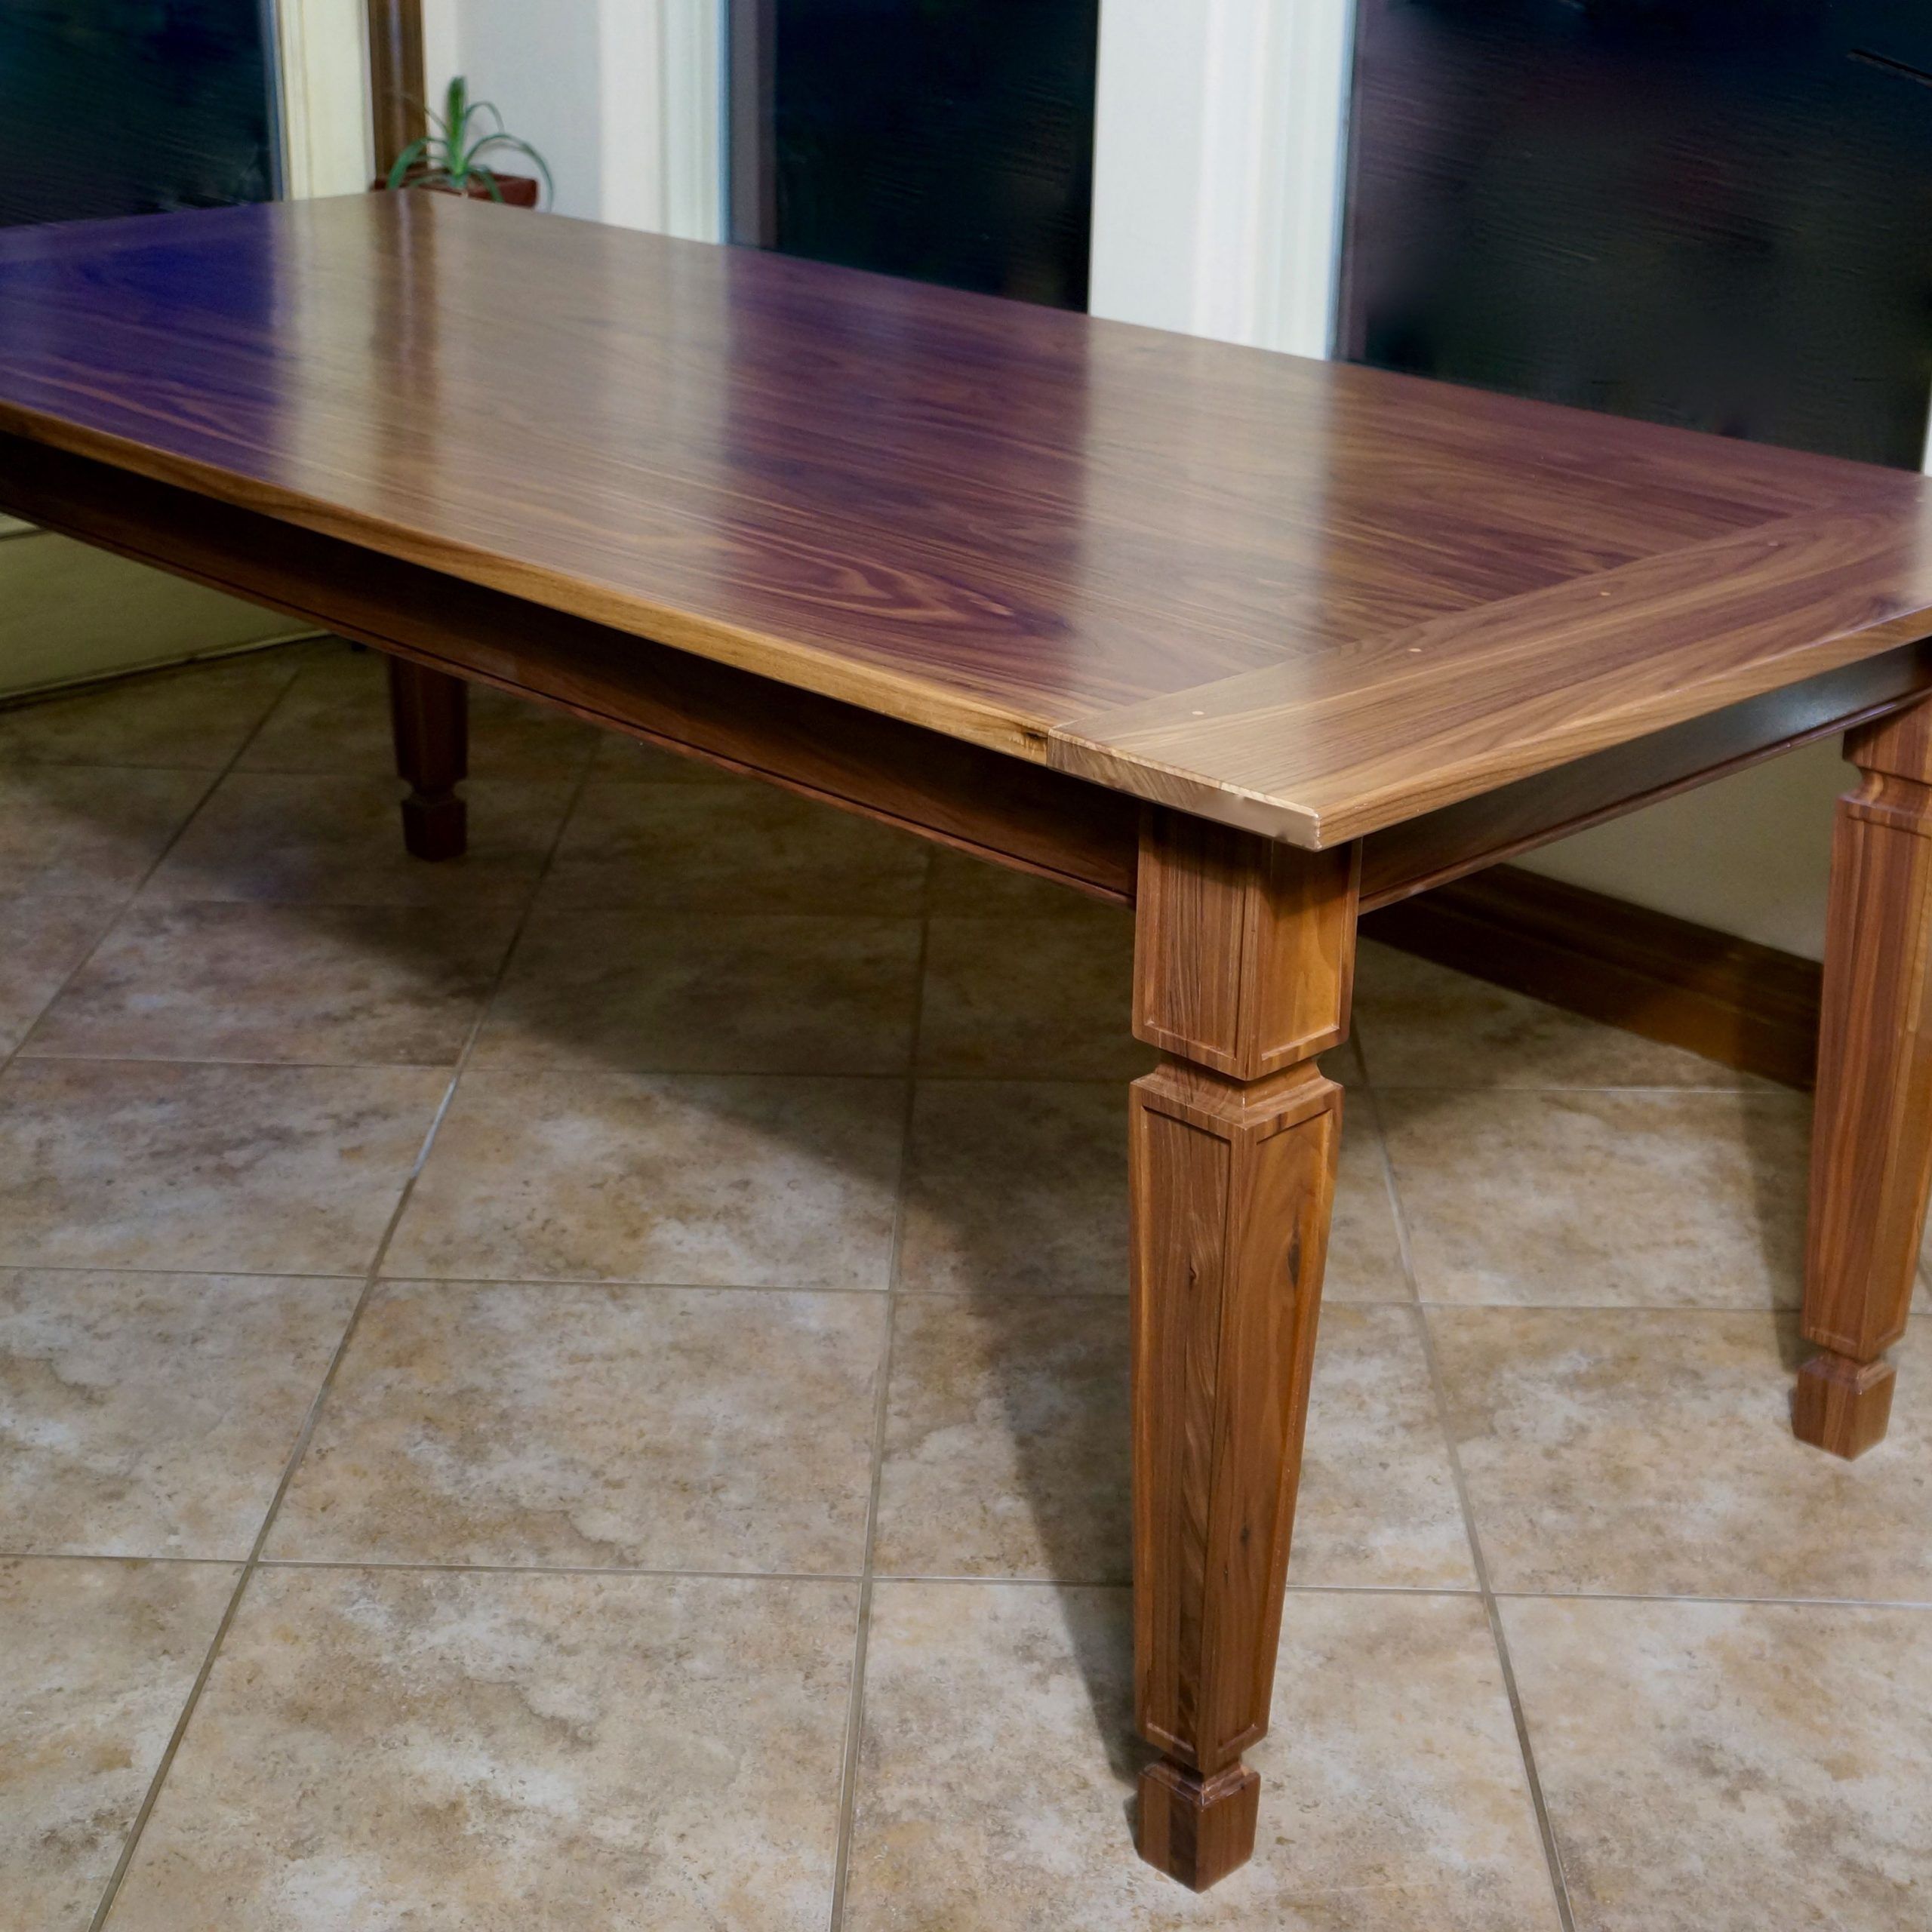 Buy Custom Made Solid Walnut Dining Table, Made To Order Inside Most Up To Date Walnut Tove Dining Tables (View 1 of 20)